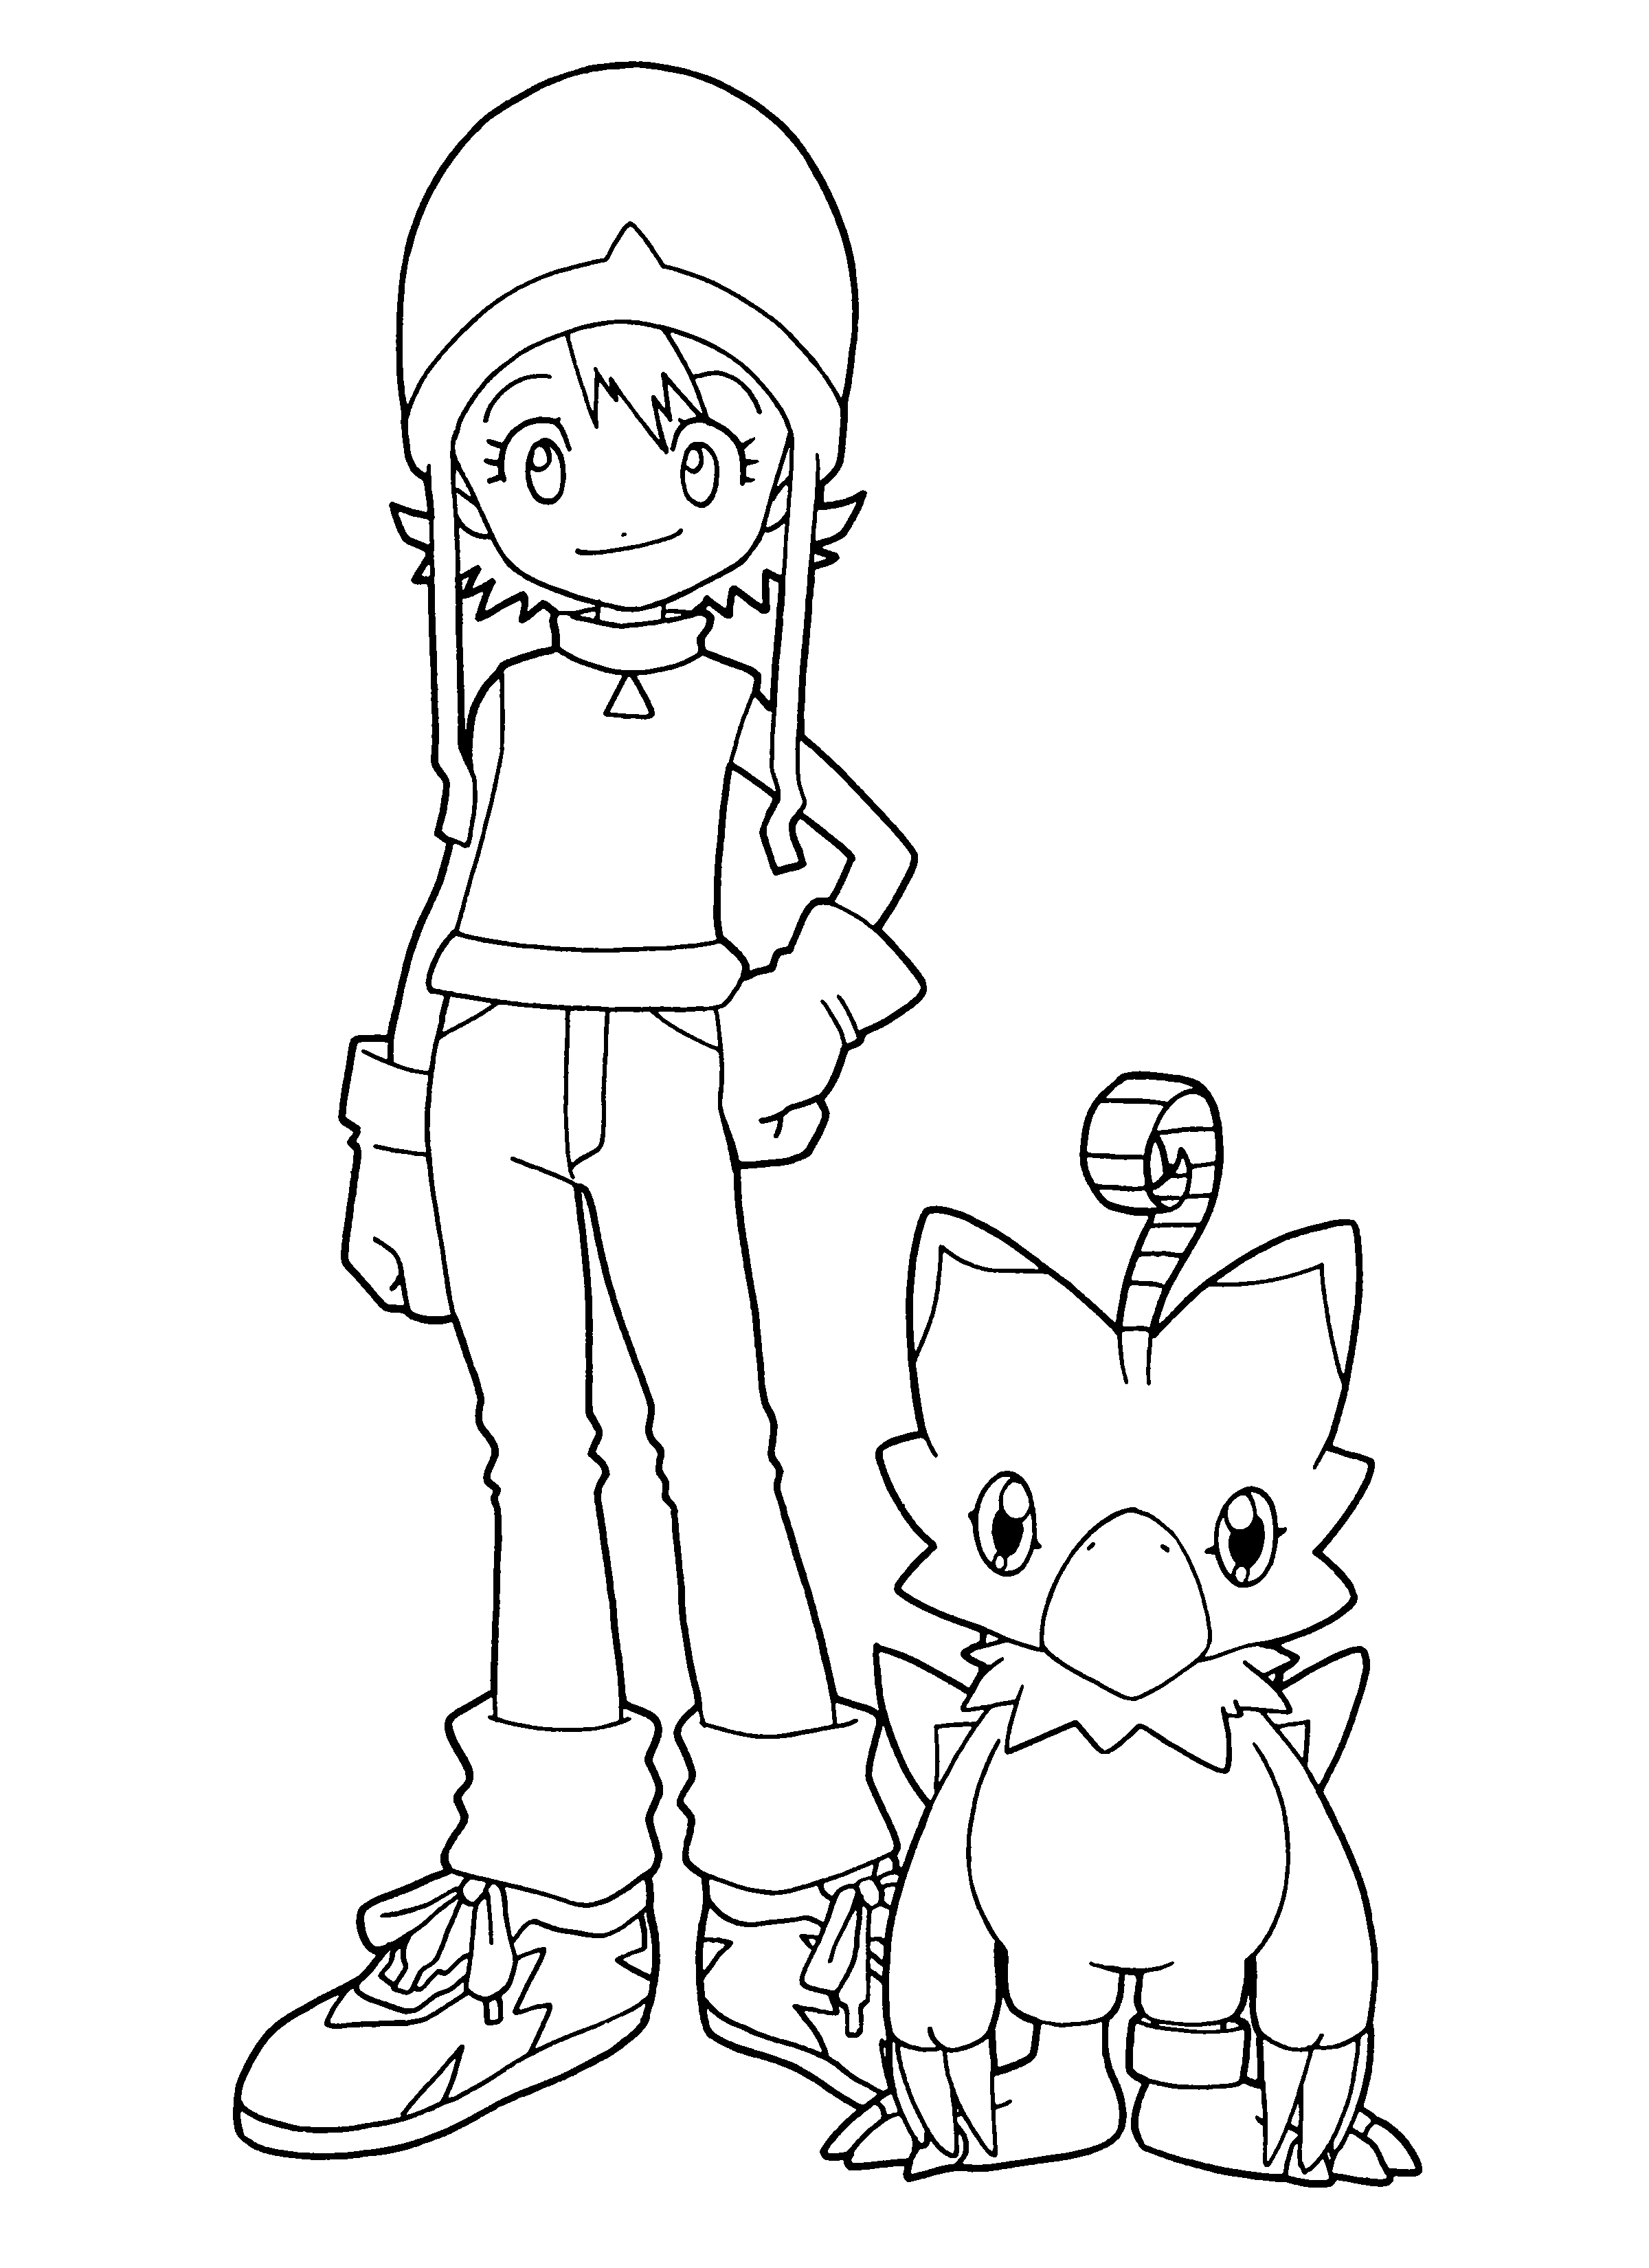 Coloring Page - Digimon coloring pages 98